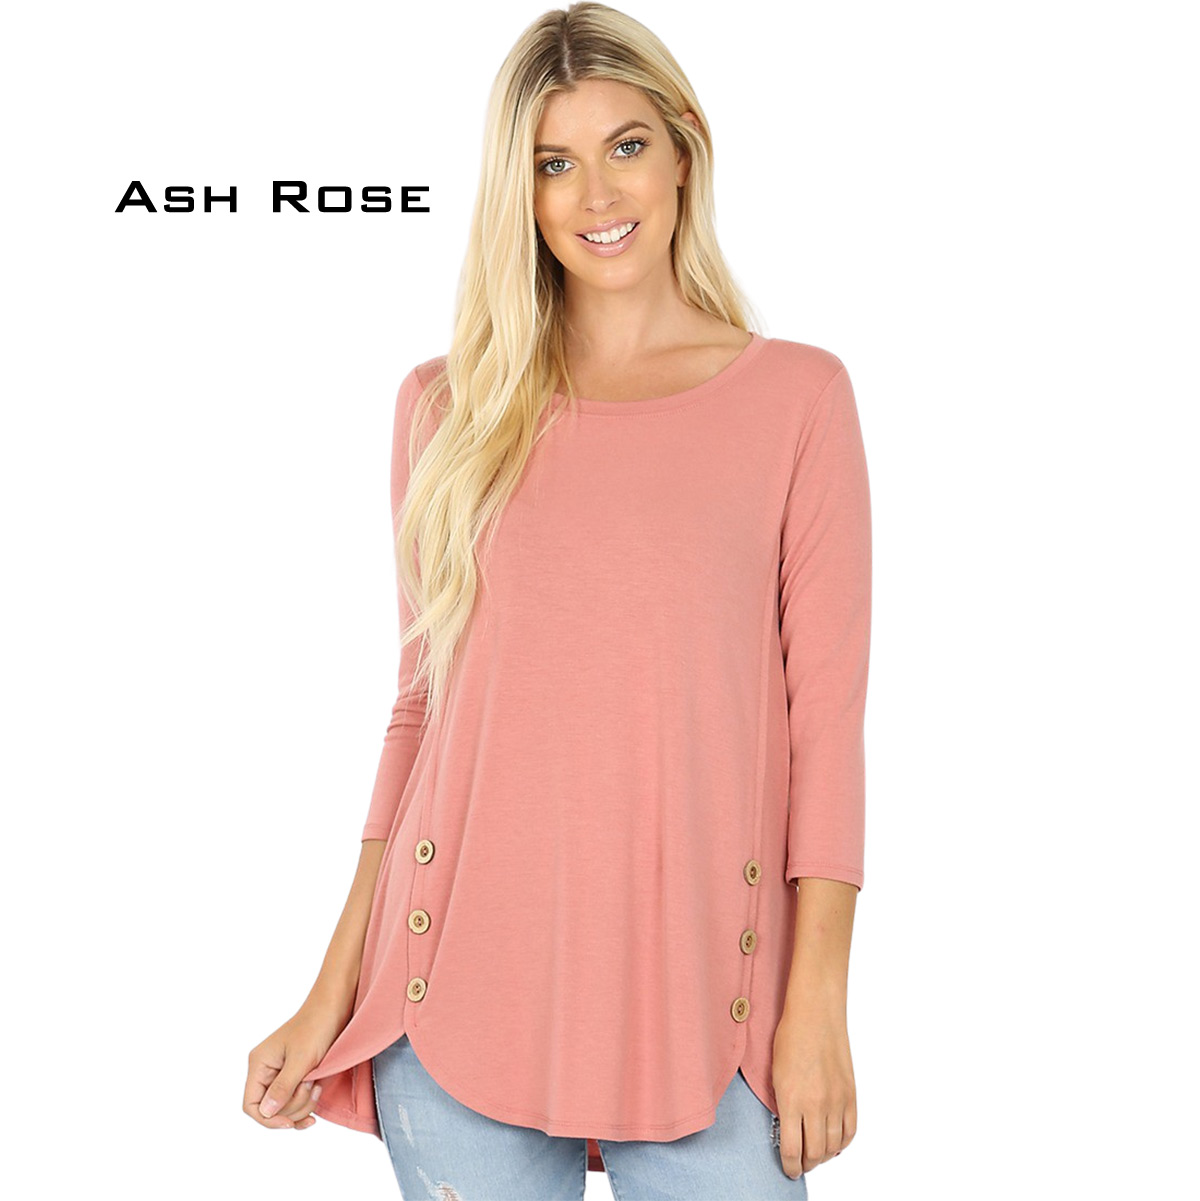 ASH ROSE 3/4 Sleeve Side Wood Buttons Top 2032